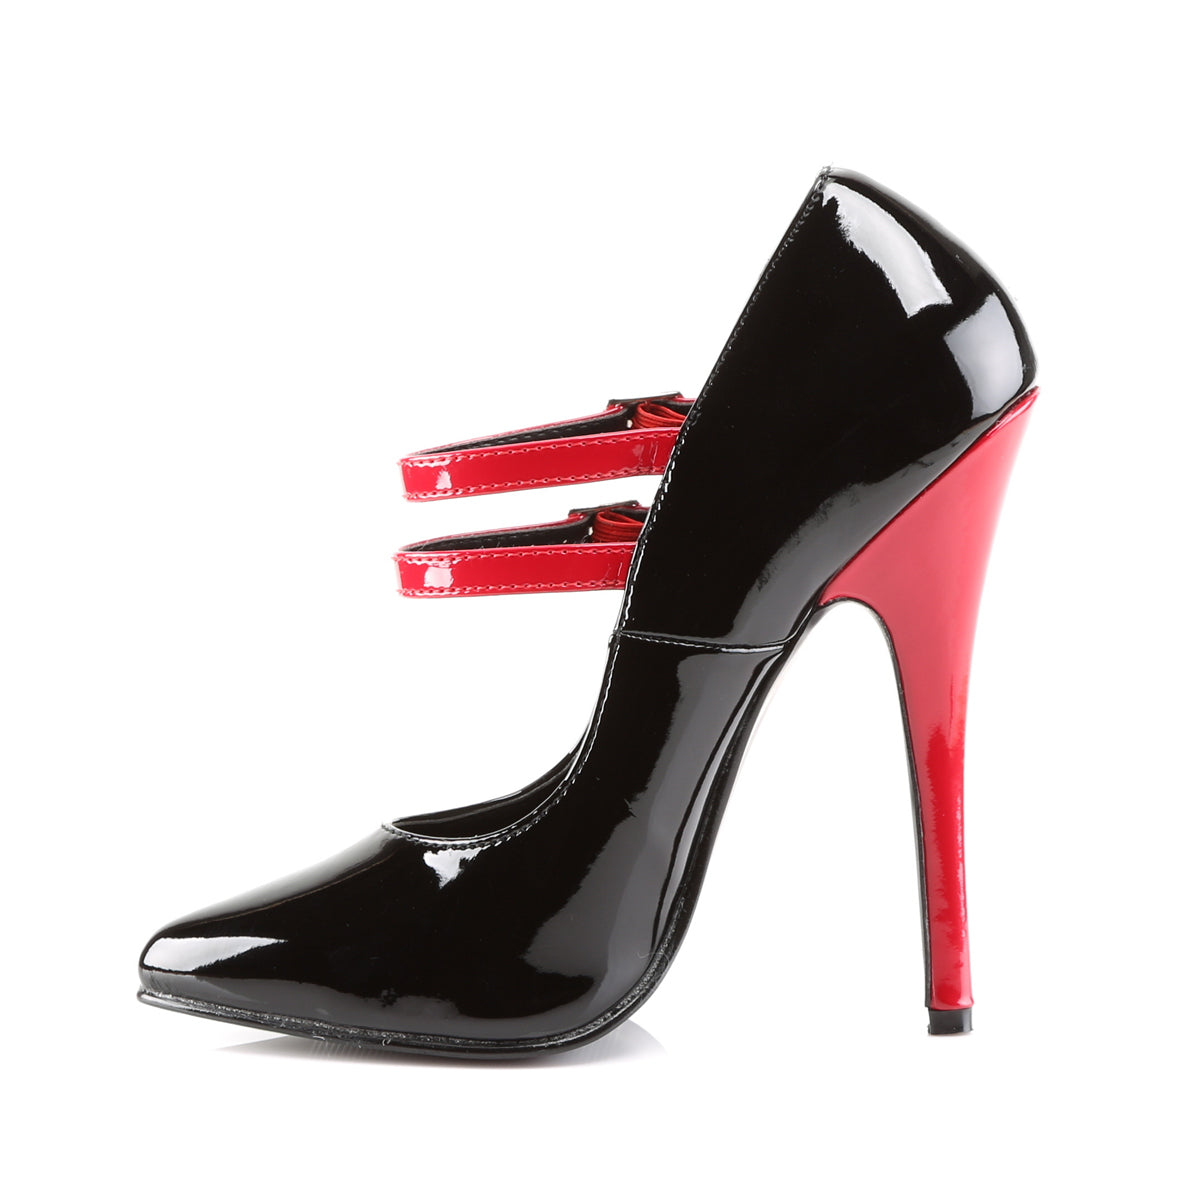 DOMINA 442 Devious Fetish Shoes 6" Heel Black and Red Shoes Devious Heels Pole Dance Heels